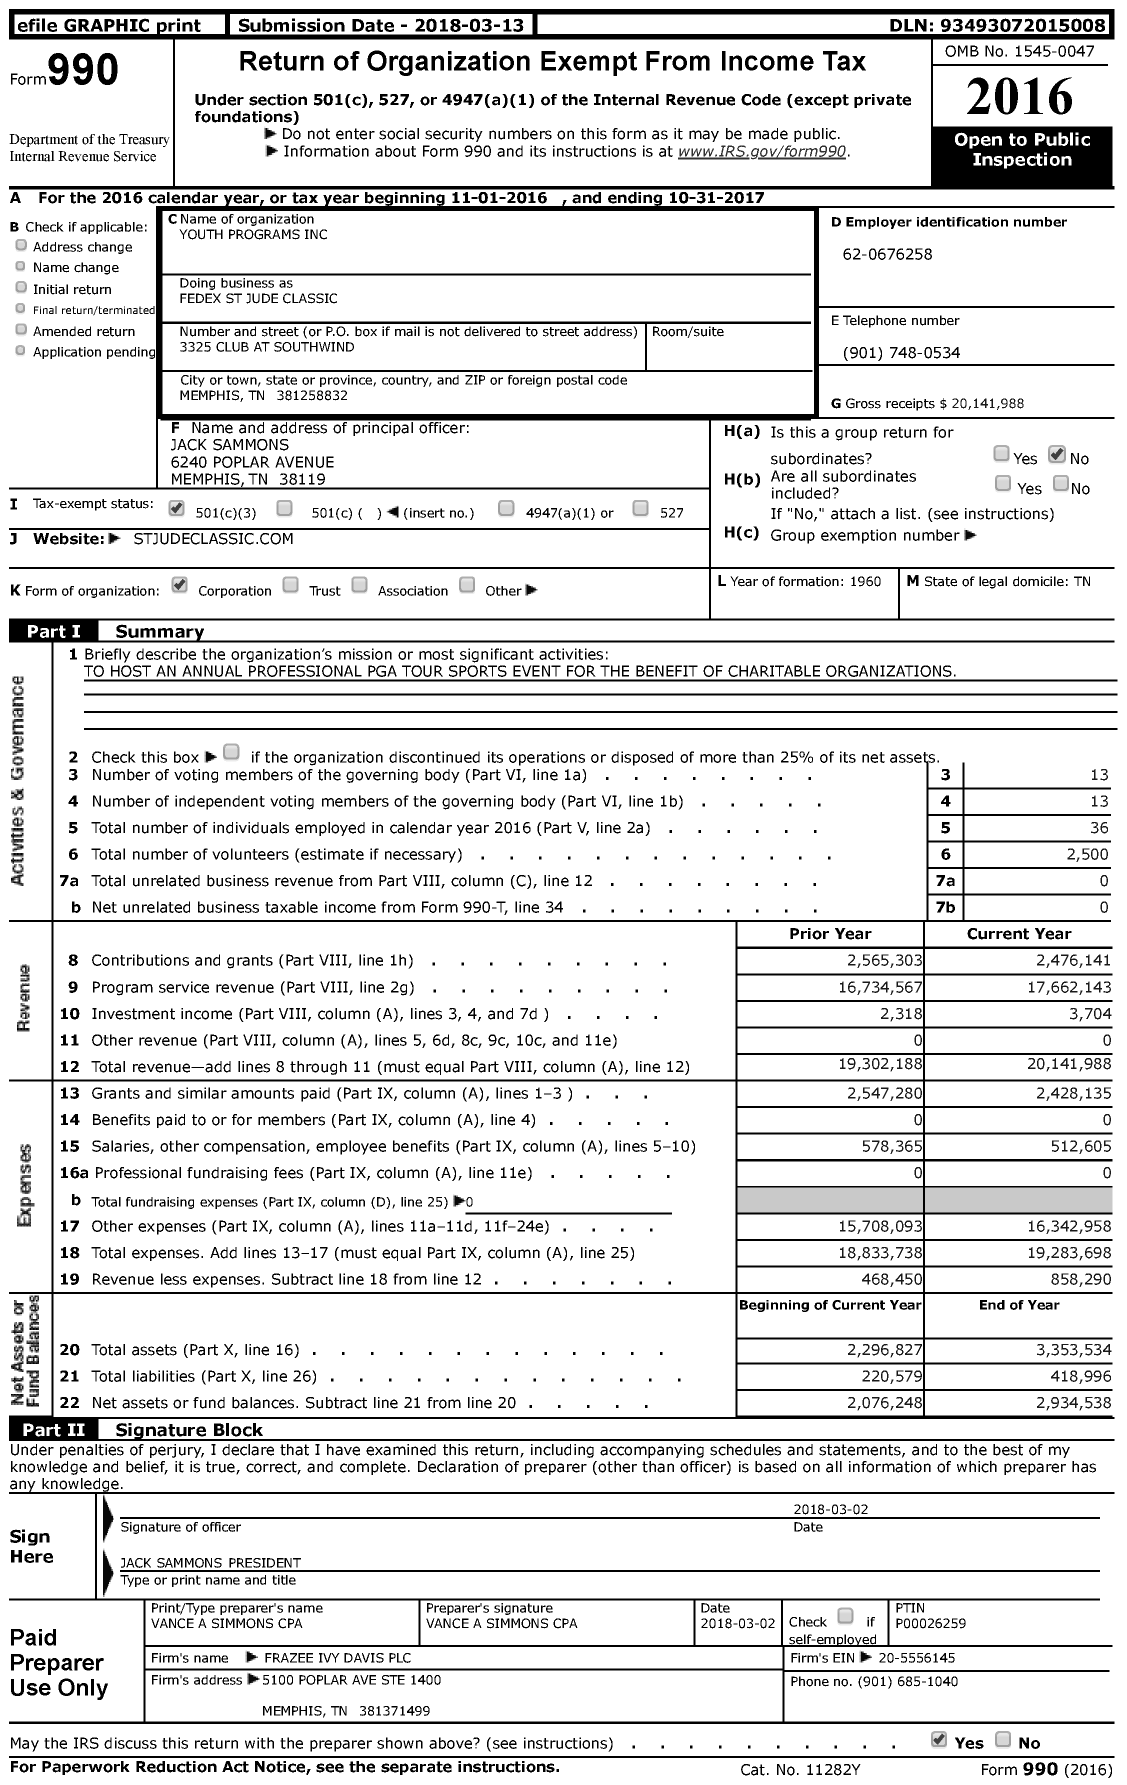 Image of first page of 2016 Form 990 for FedEx St Jude Classic